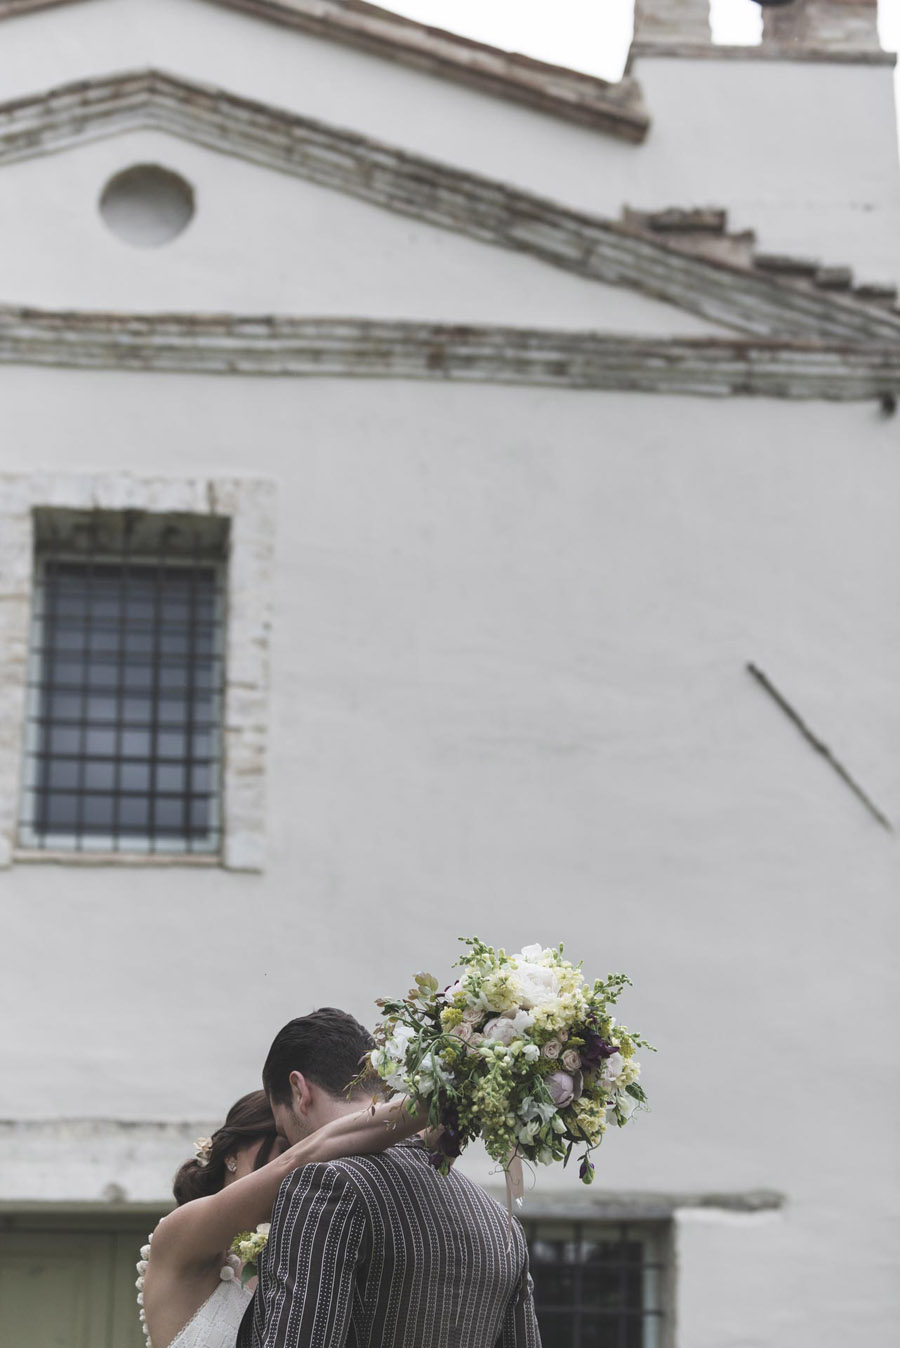 Stunning destination wedding ideas from Italy, images by Francesco Cesaroni (32)